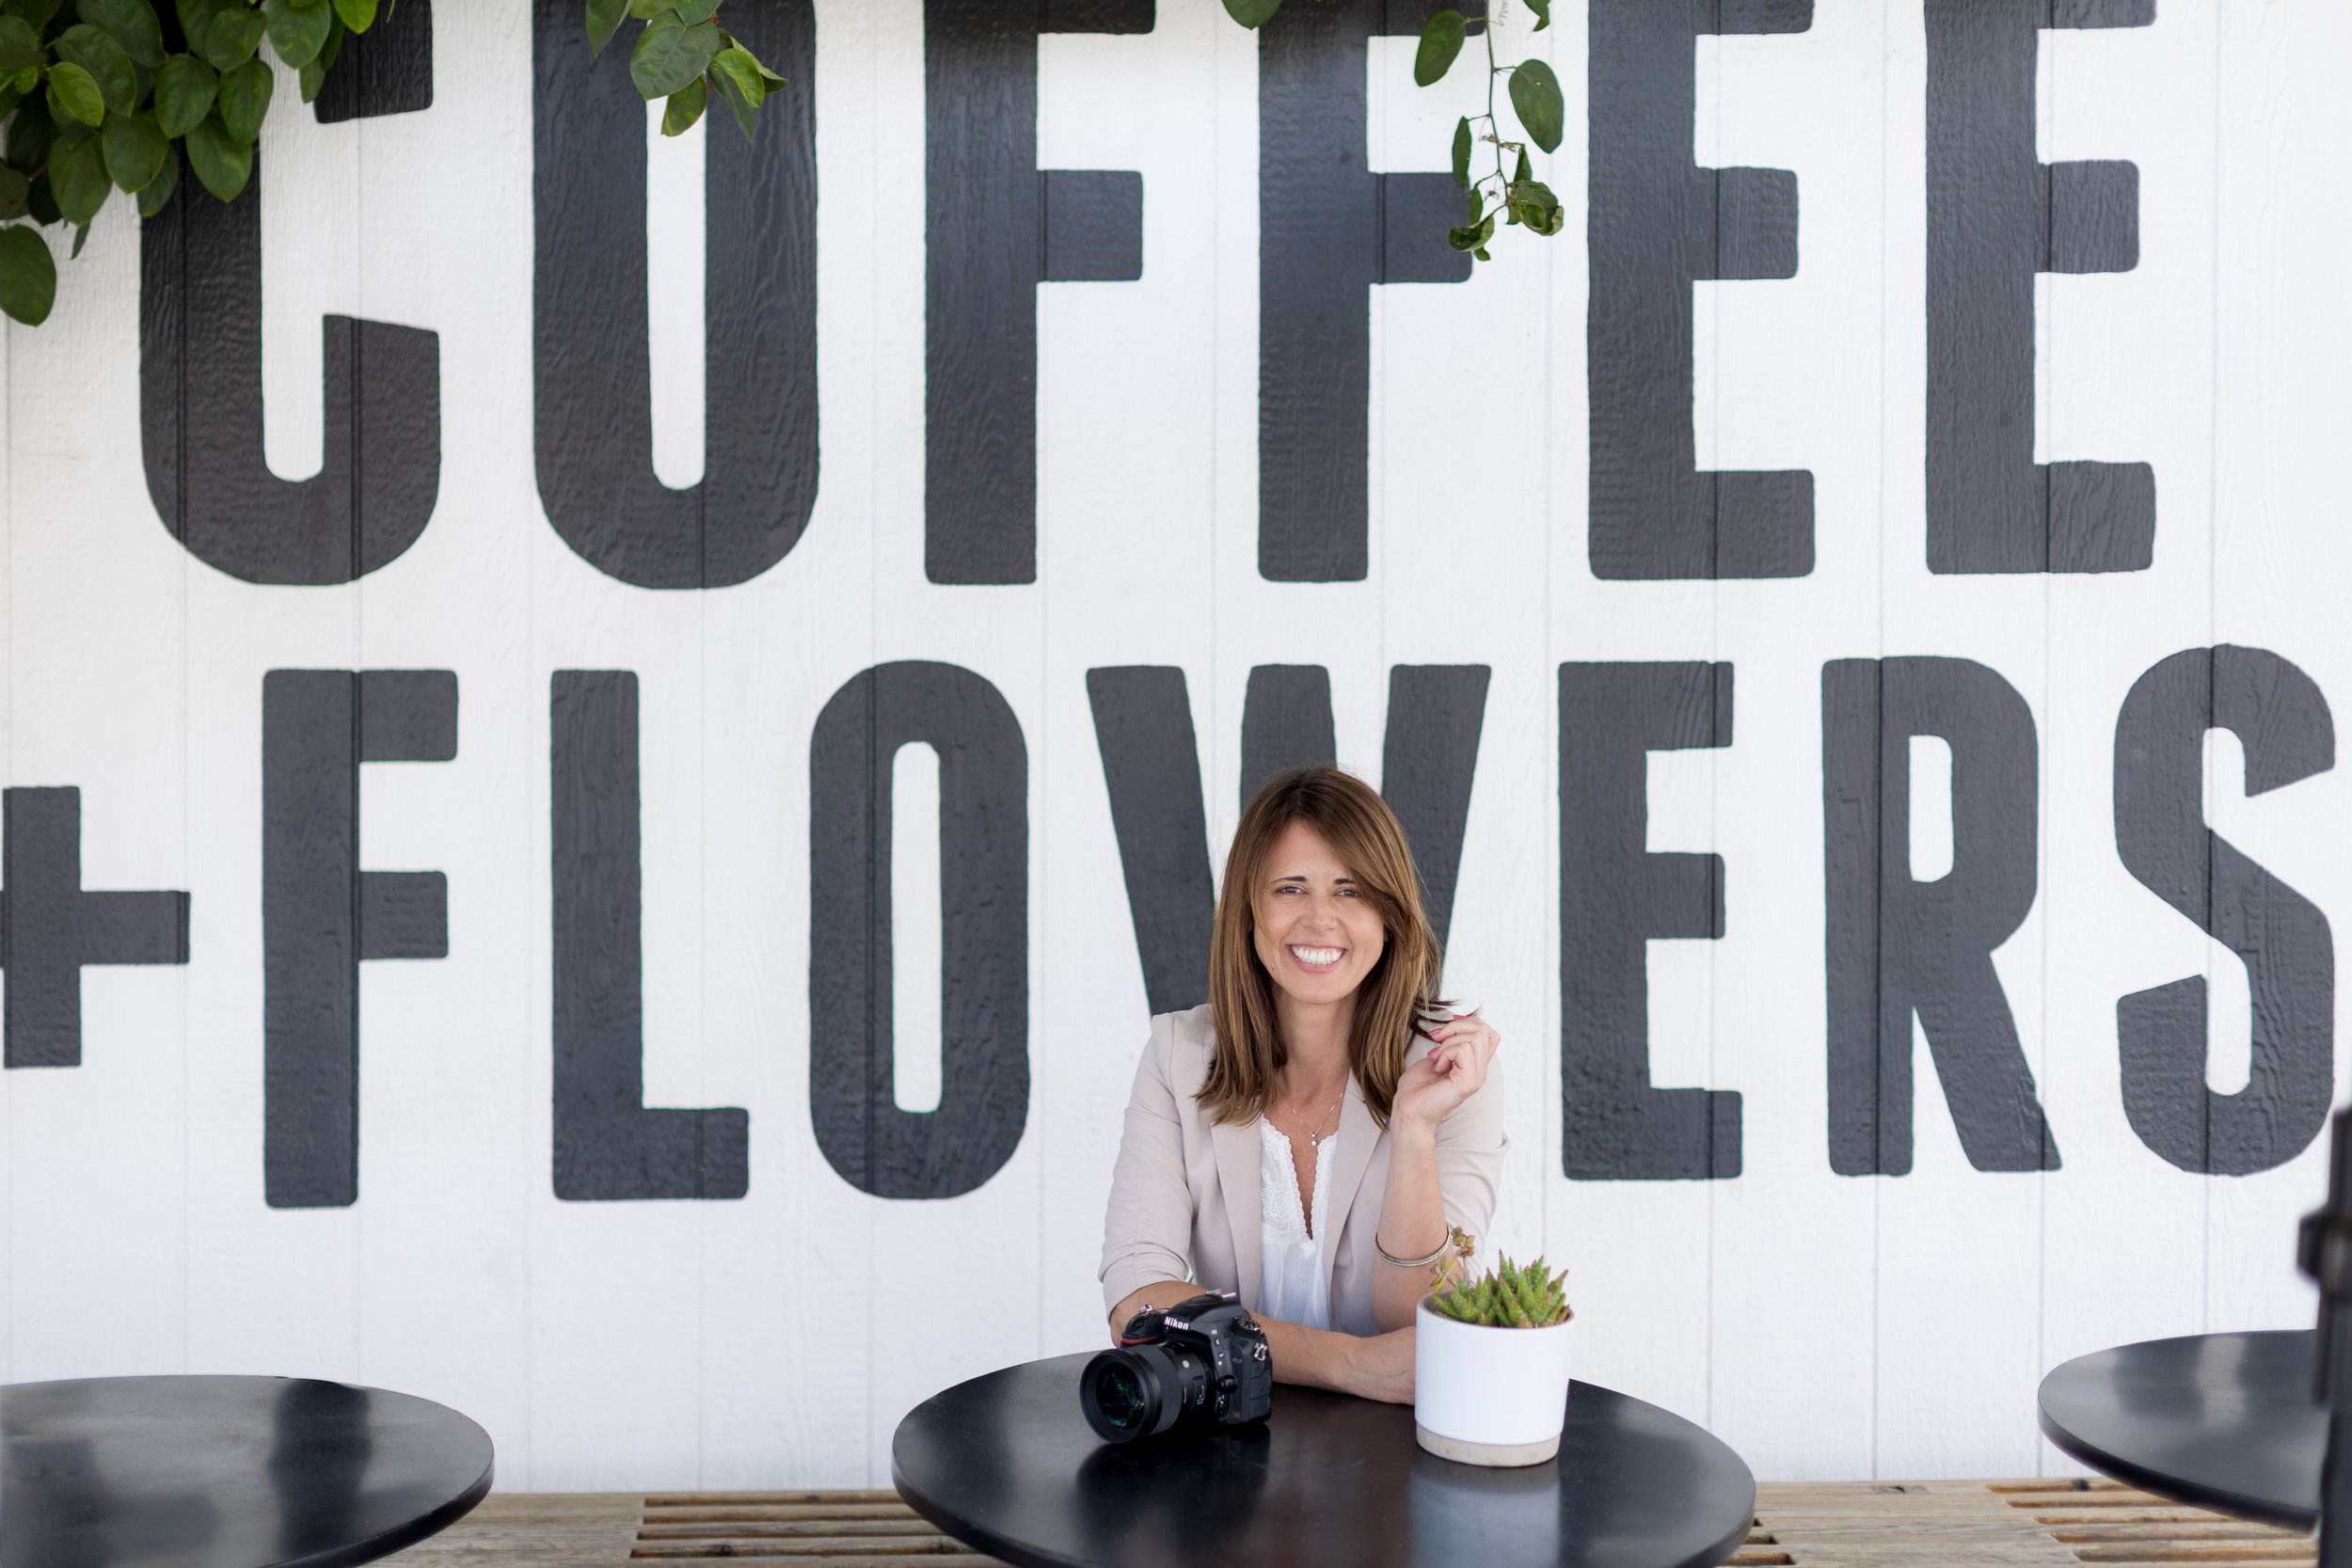 Instagrammable coffee shops in San Diego for personal branding photos-1.jpg